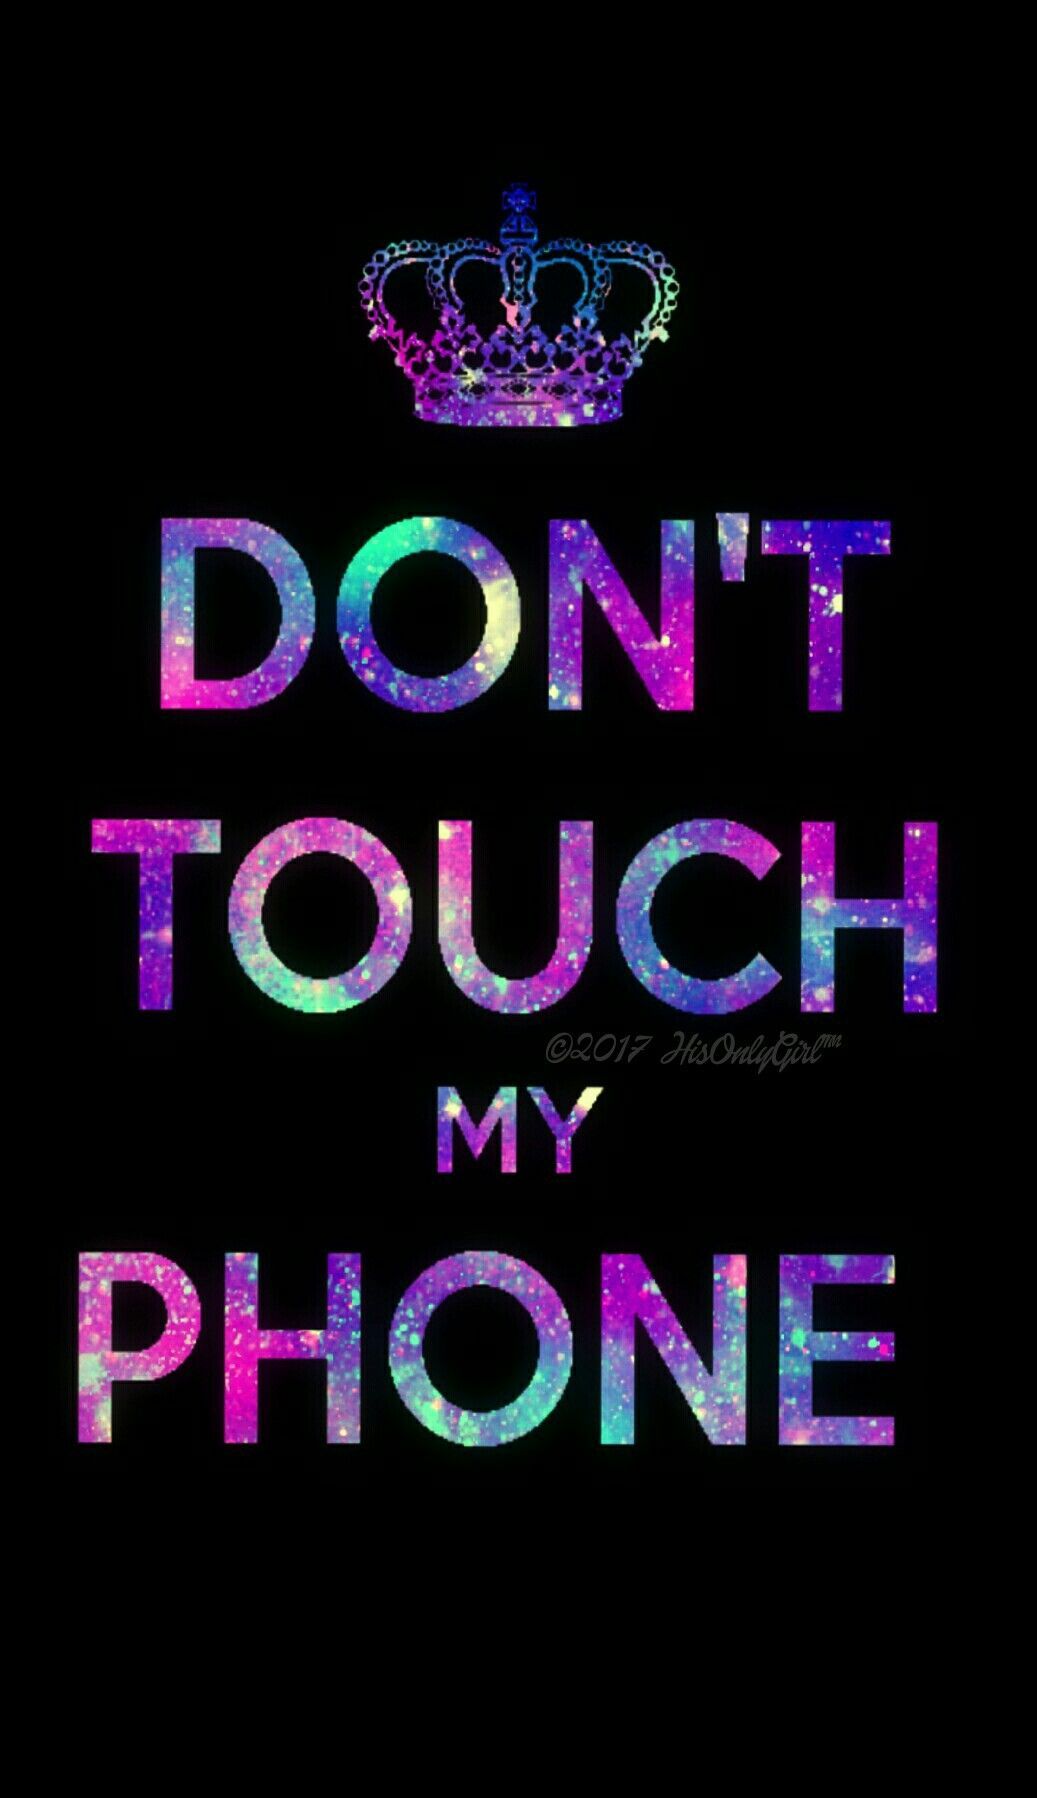 Dont Touch My Phone Wallpapers  10 Awesome Backgrounds